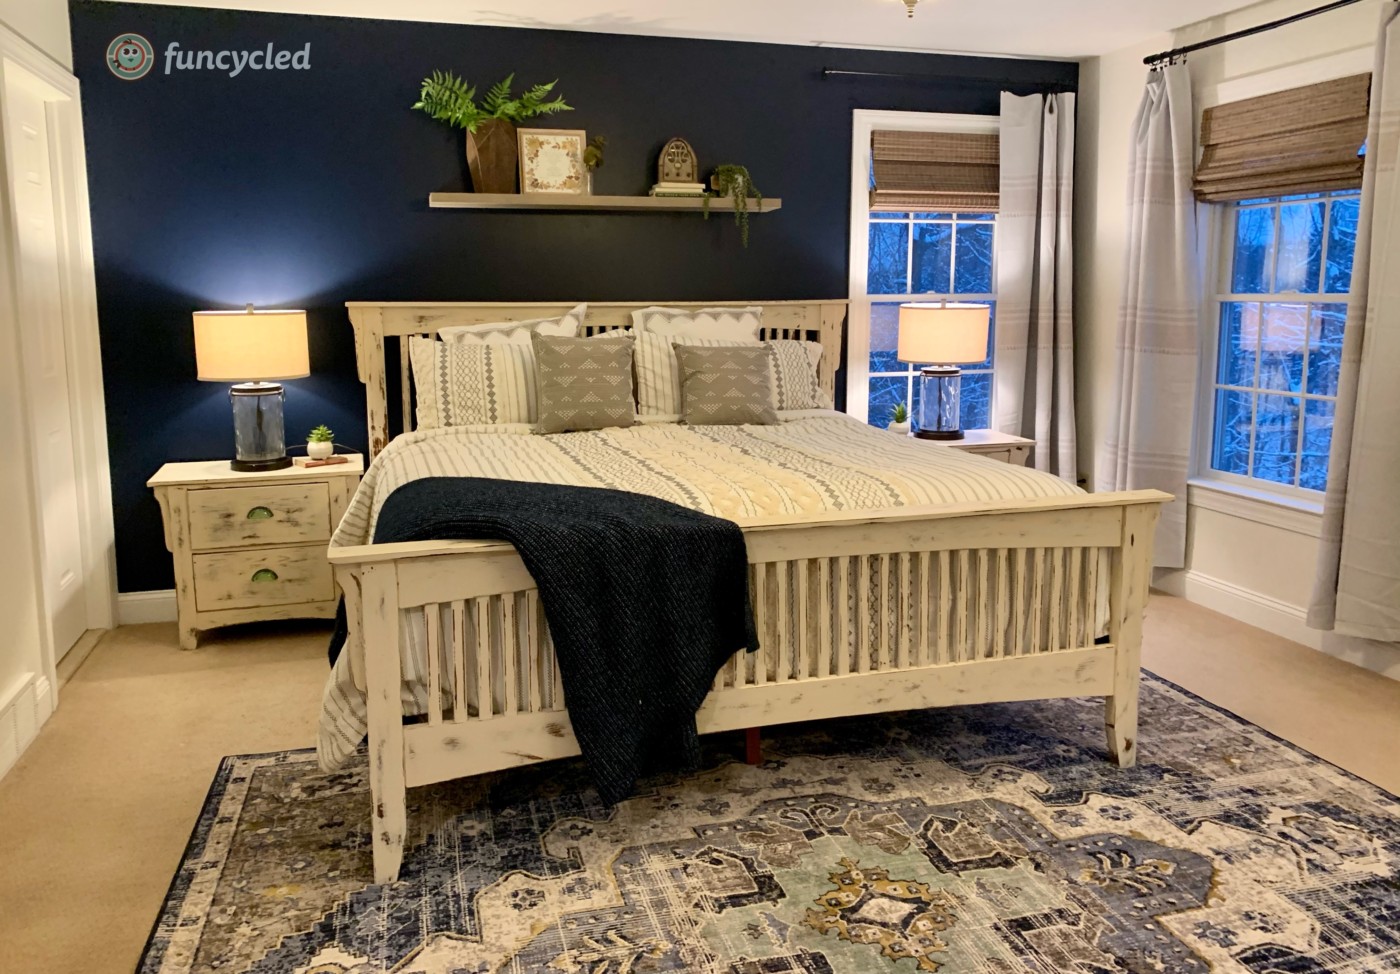 painted mission style bedroom furniture